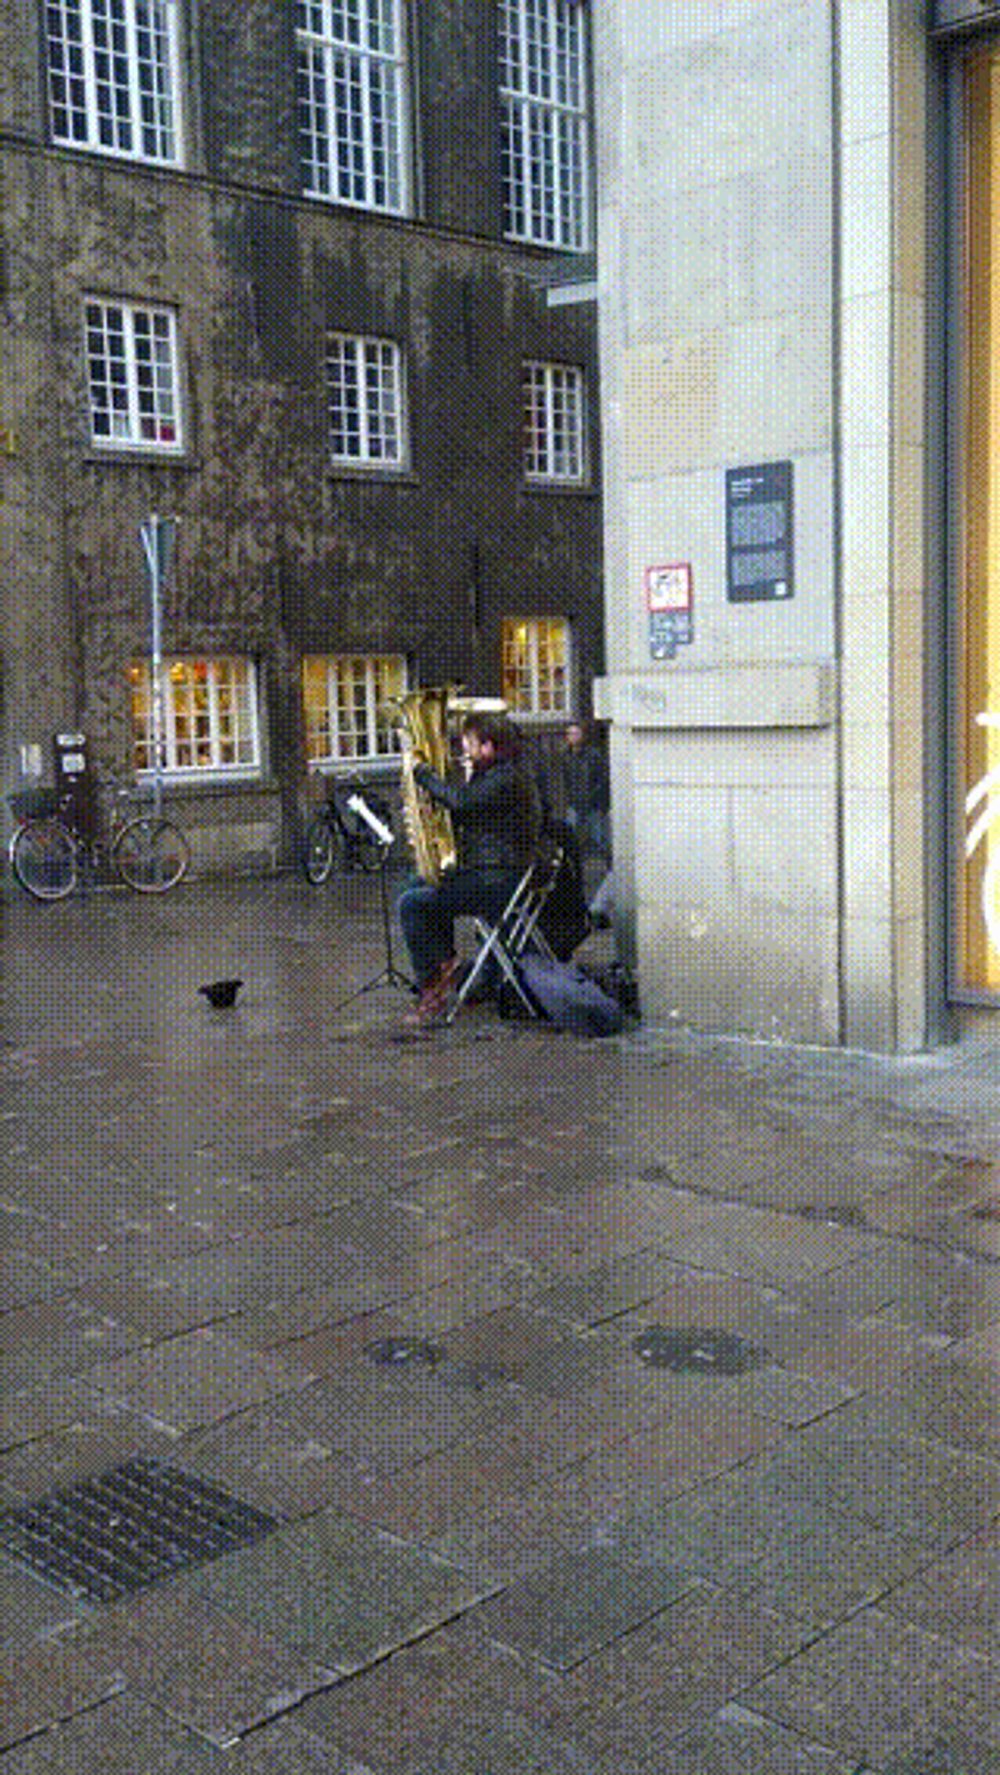 Another image of the same street musician playing